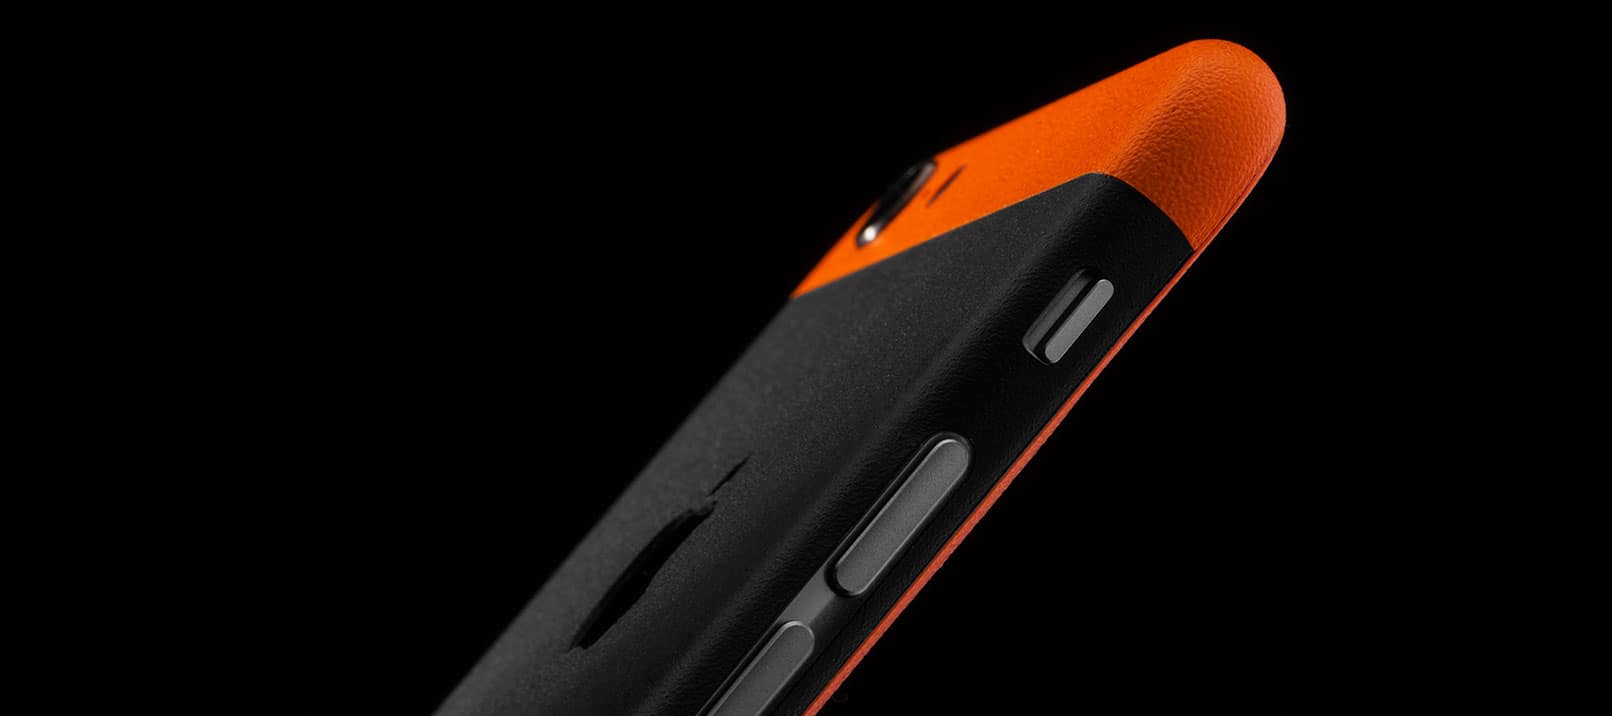 A Protective Skin For Your iPhone 6s Plus - 2